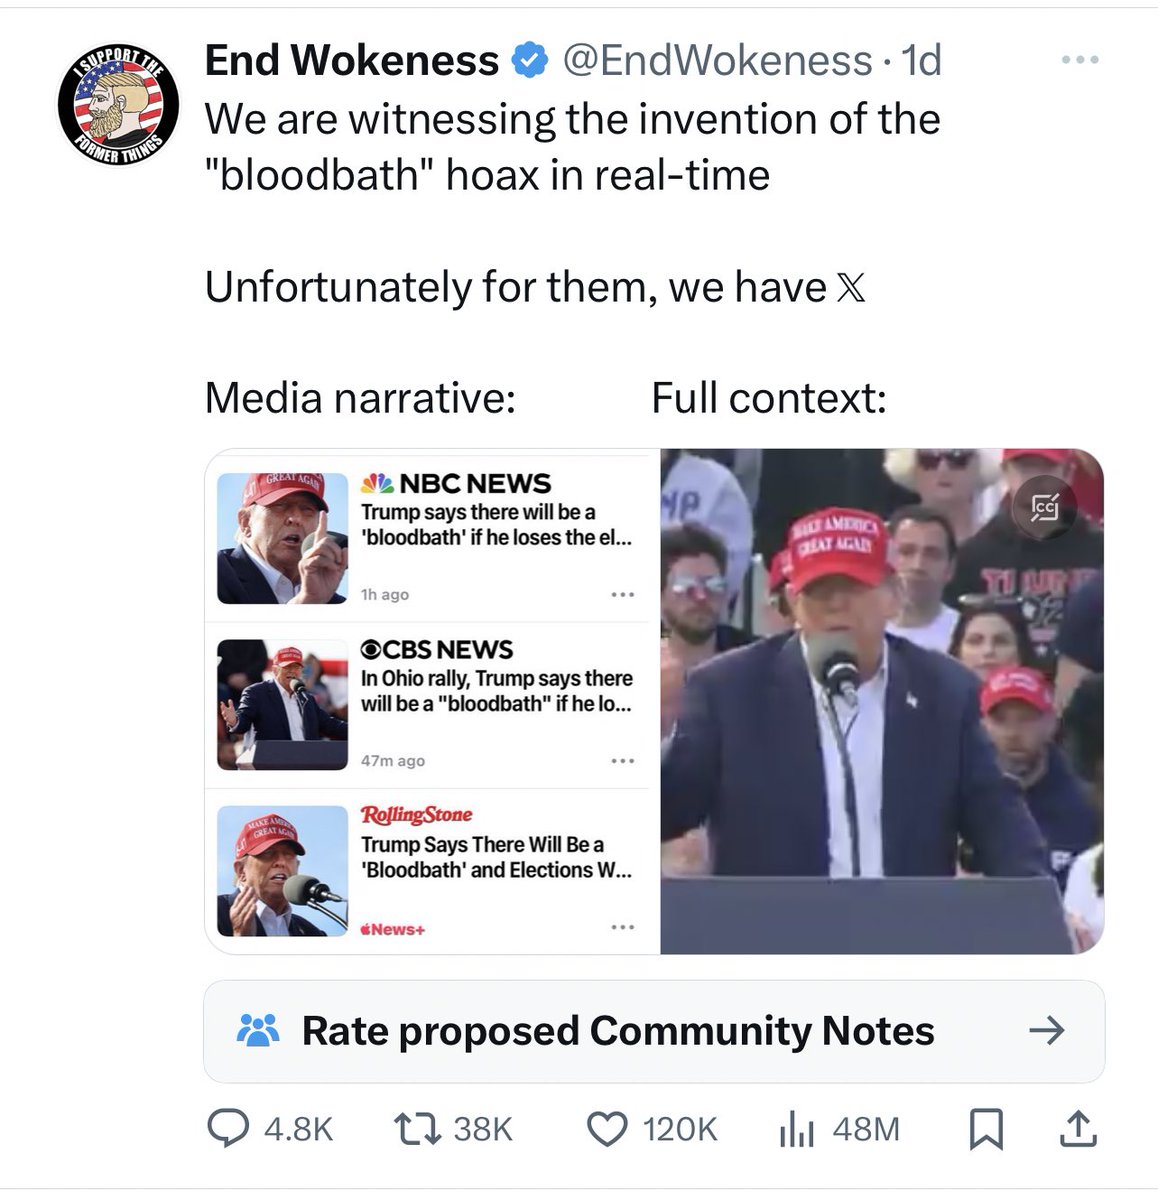 @EndWokeness Even this post has almost 10 million views 😂 And the “bloodbath” one is up to 48 million! RIP MSM.